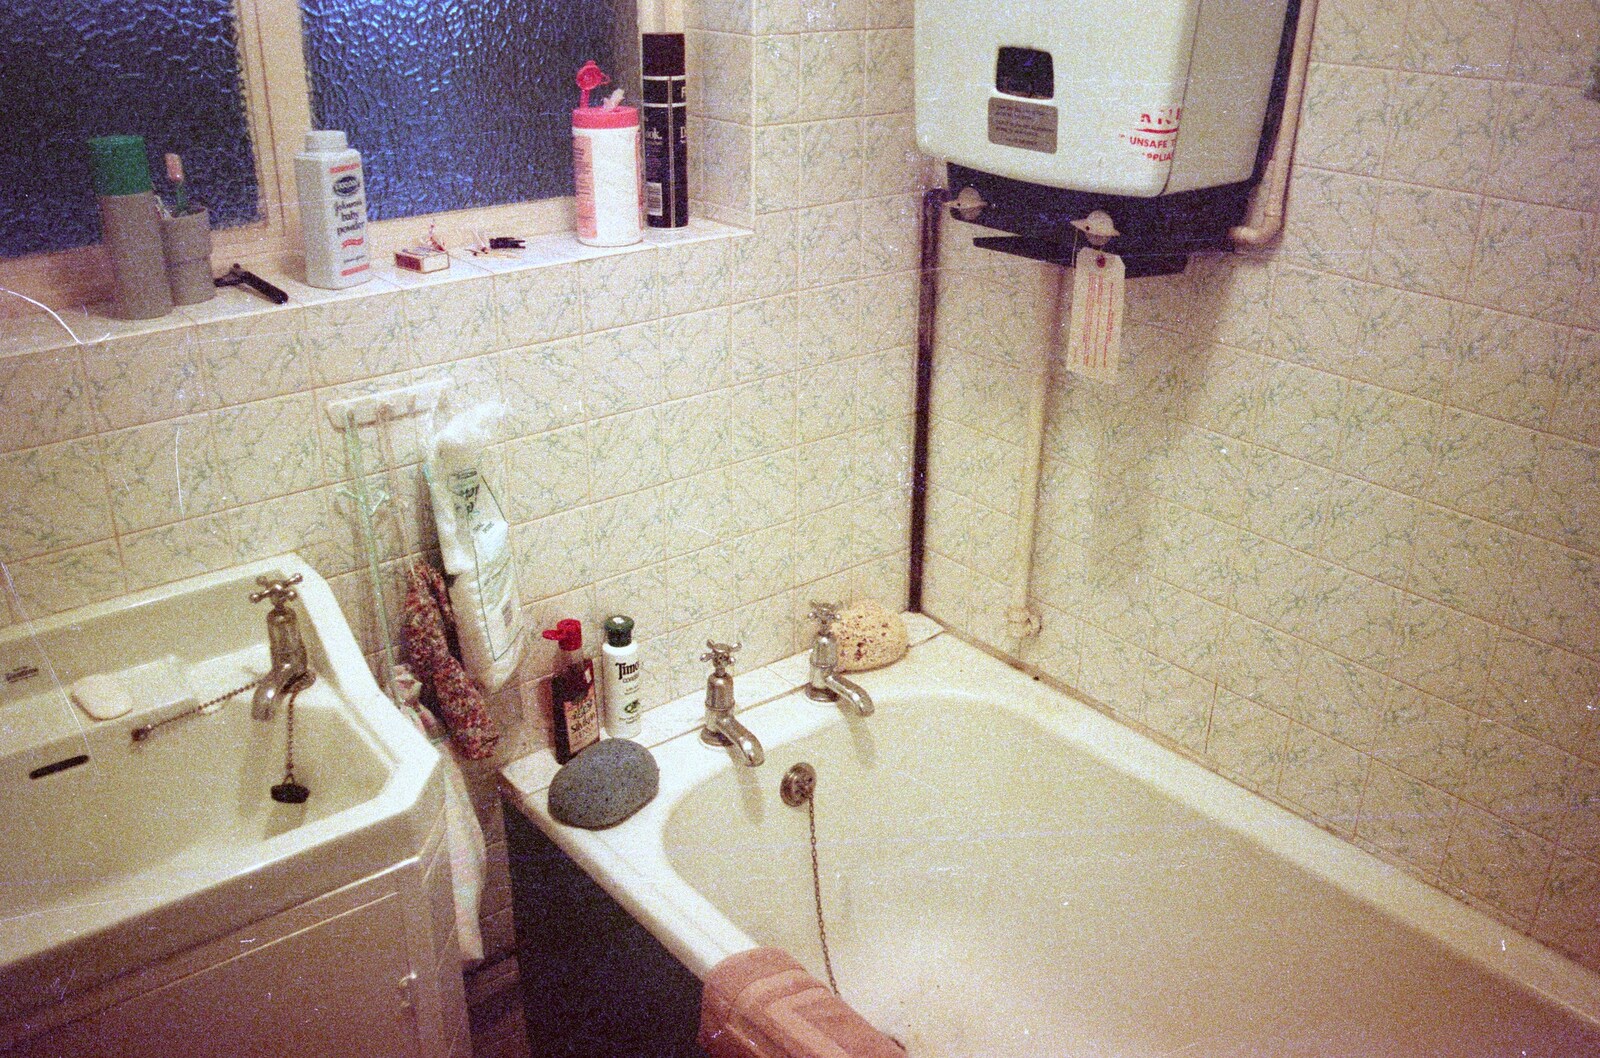 Classic 1970s tiles and bathroom from Bracken Way, Walkford, Dorset - 15th September 1986